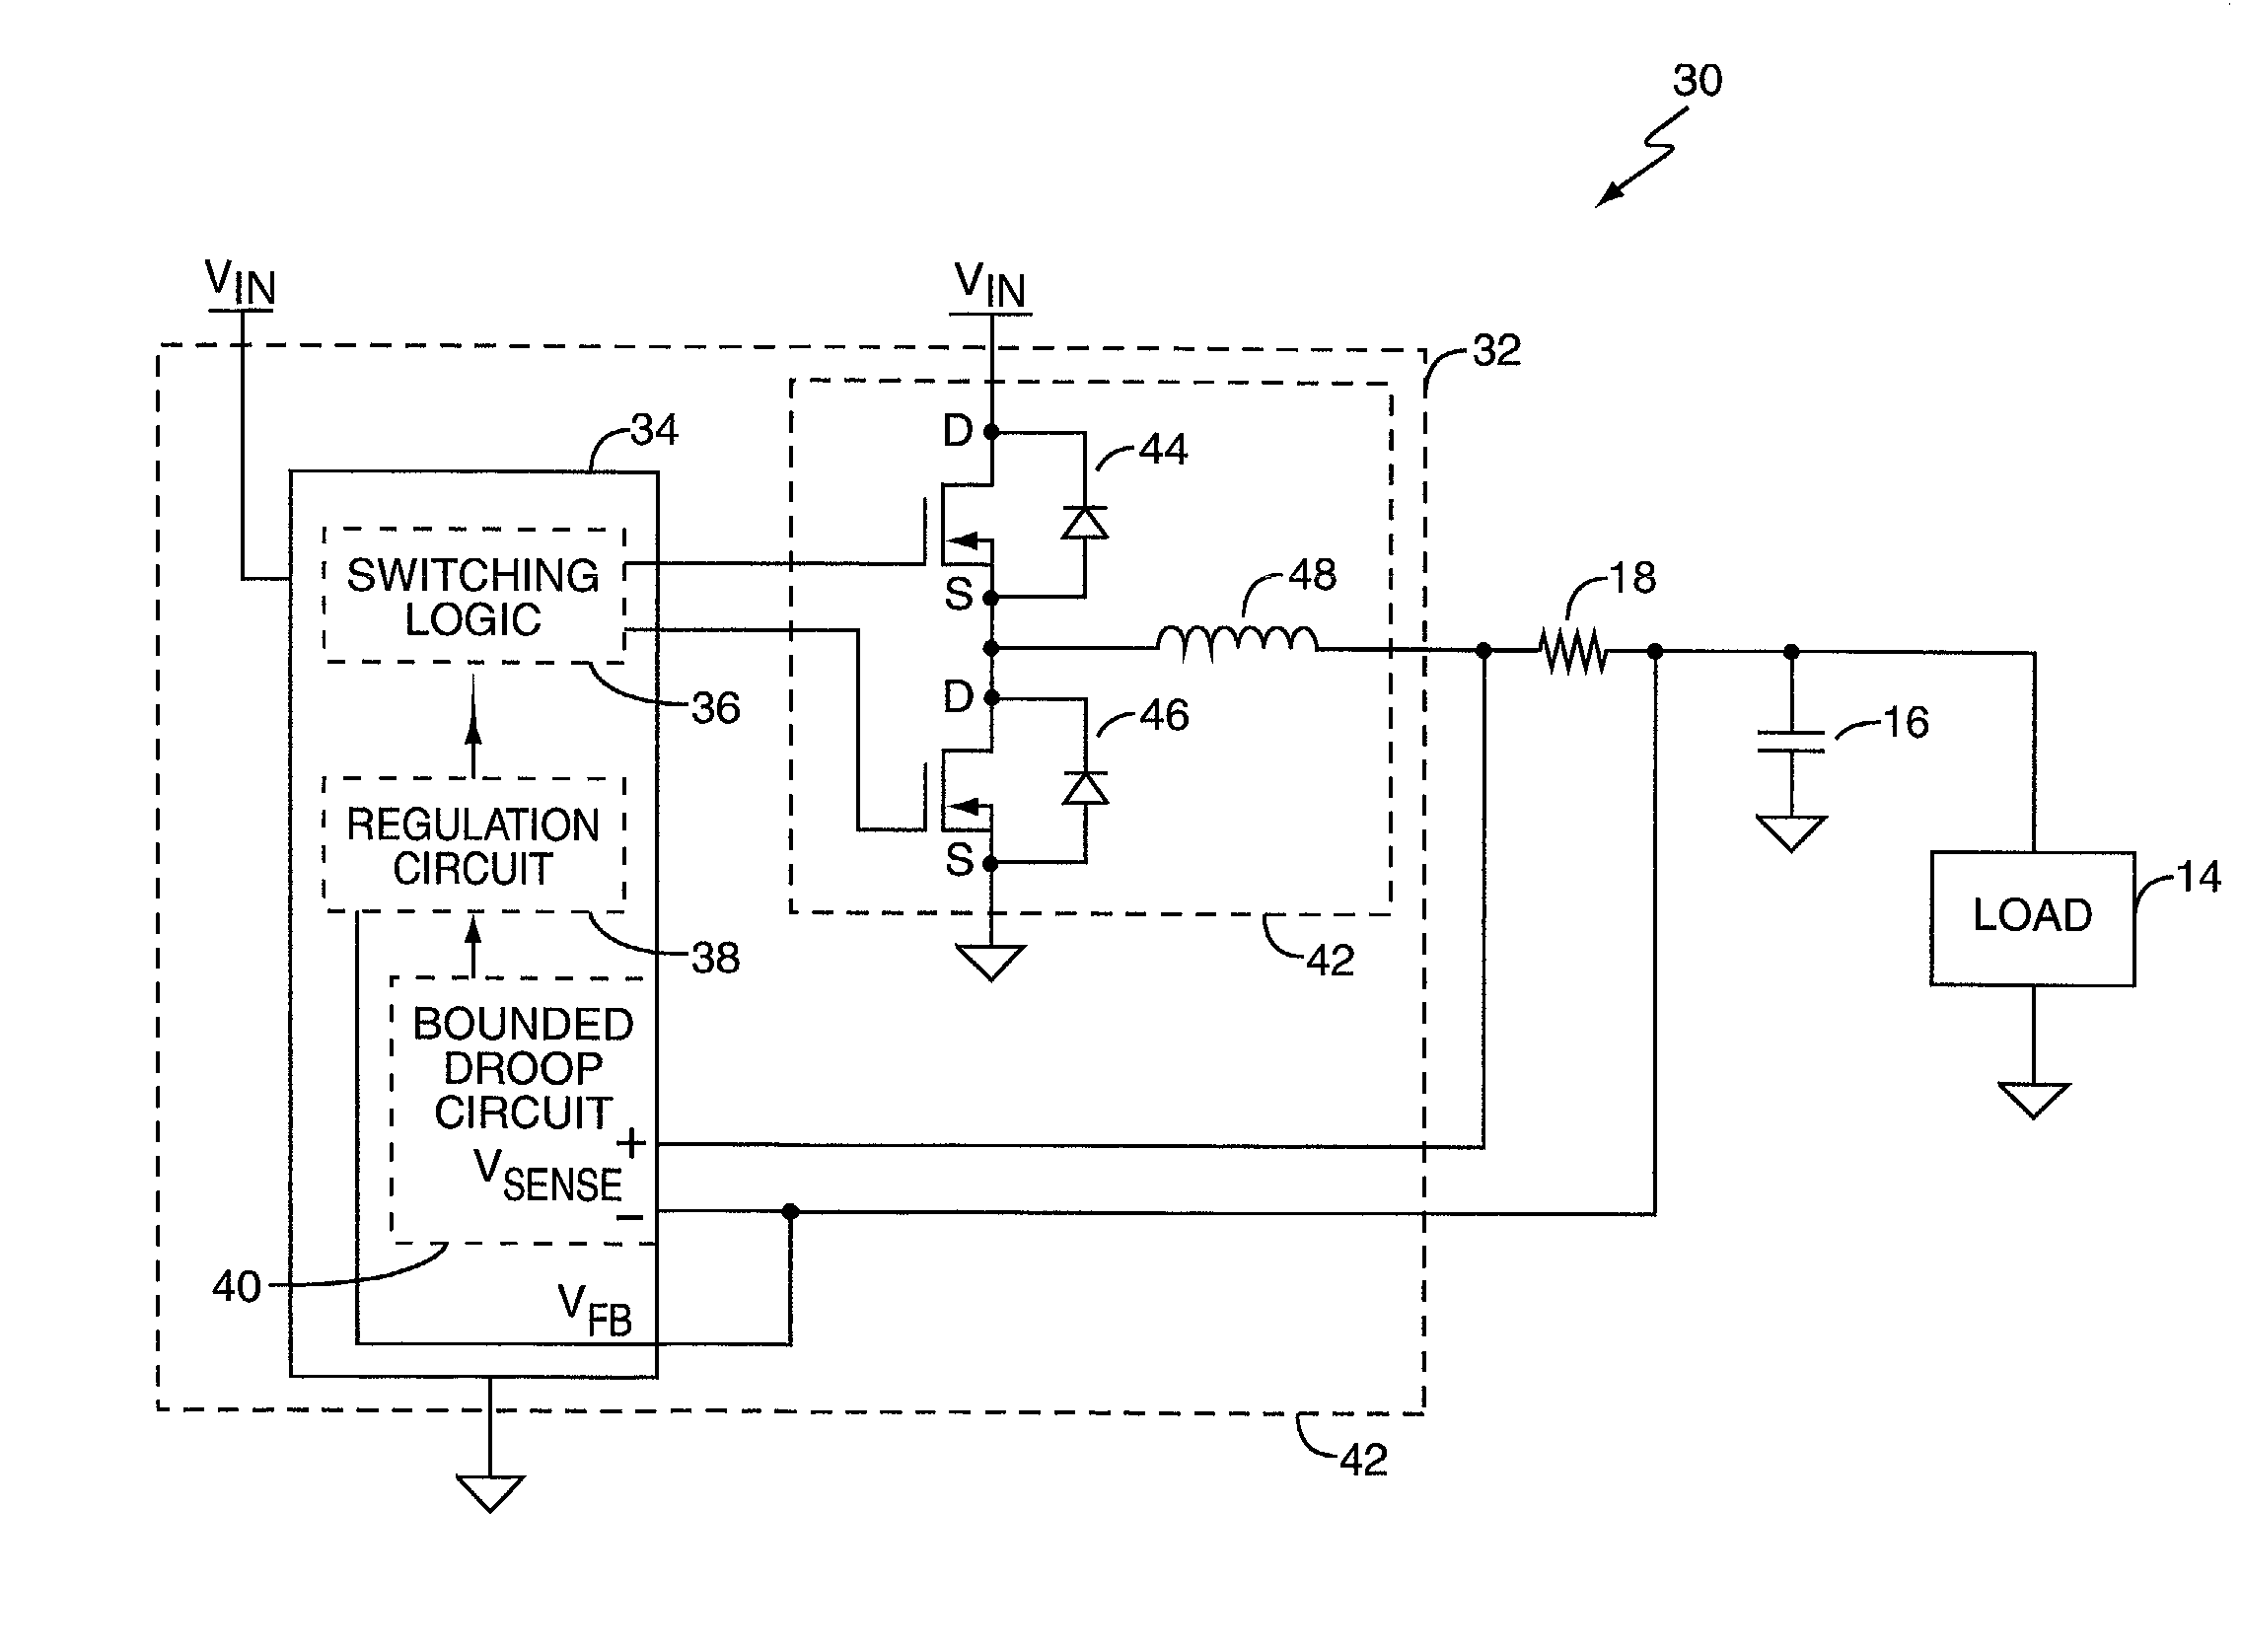 Bounded power supply voltage positioning